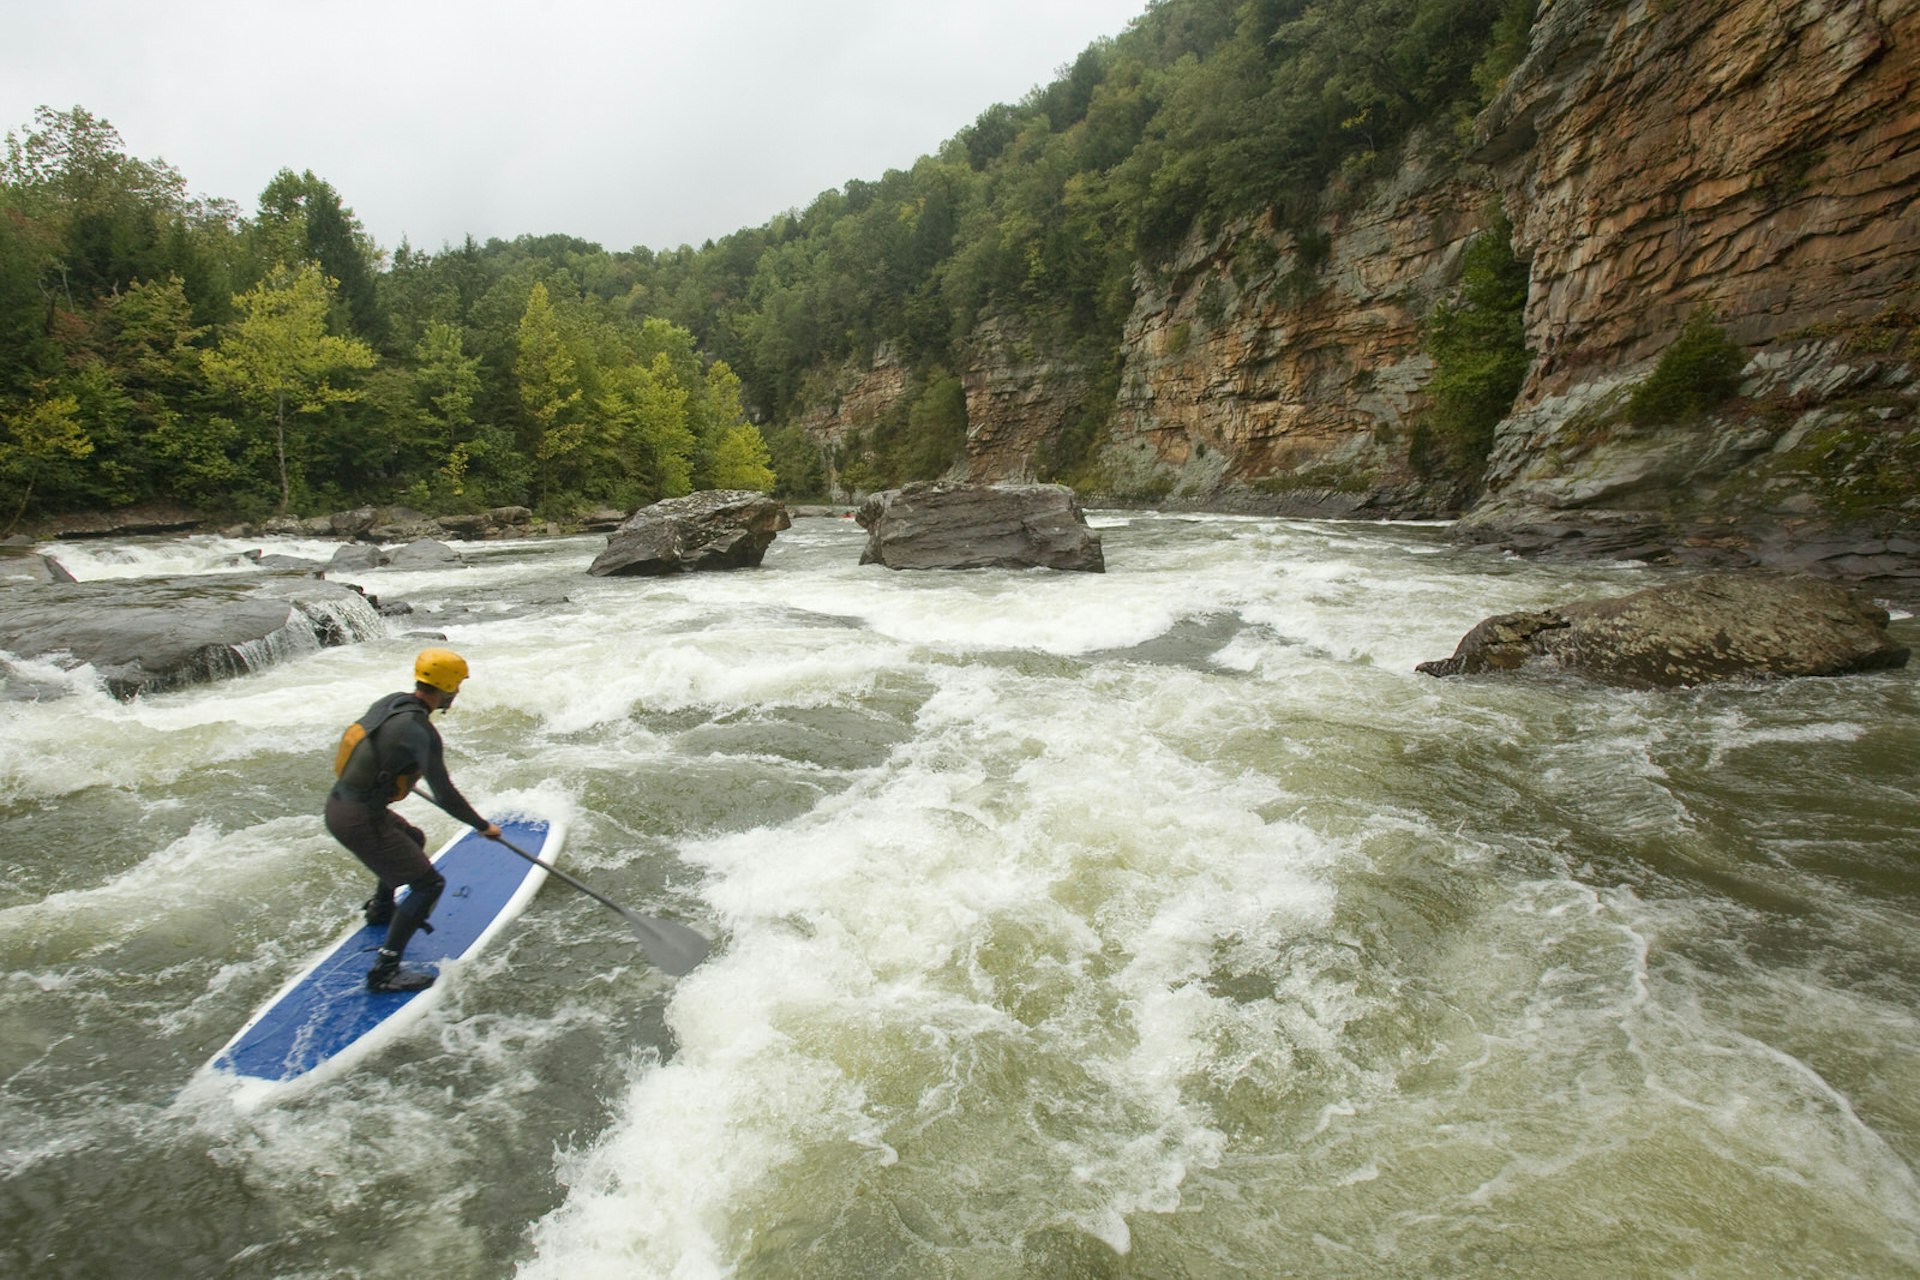 Luke Hopkins entering Canyon Doors while stand up paddleboarding the lower Gauley River near Fayetteville, West Virginia.